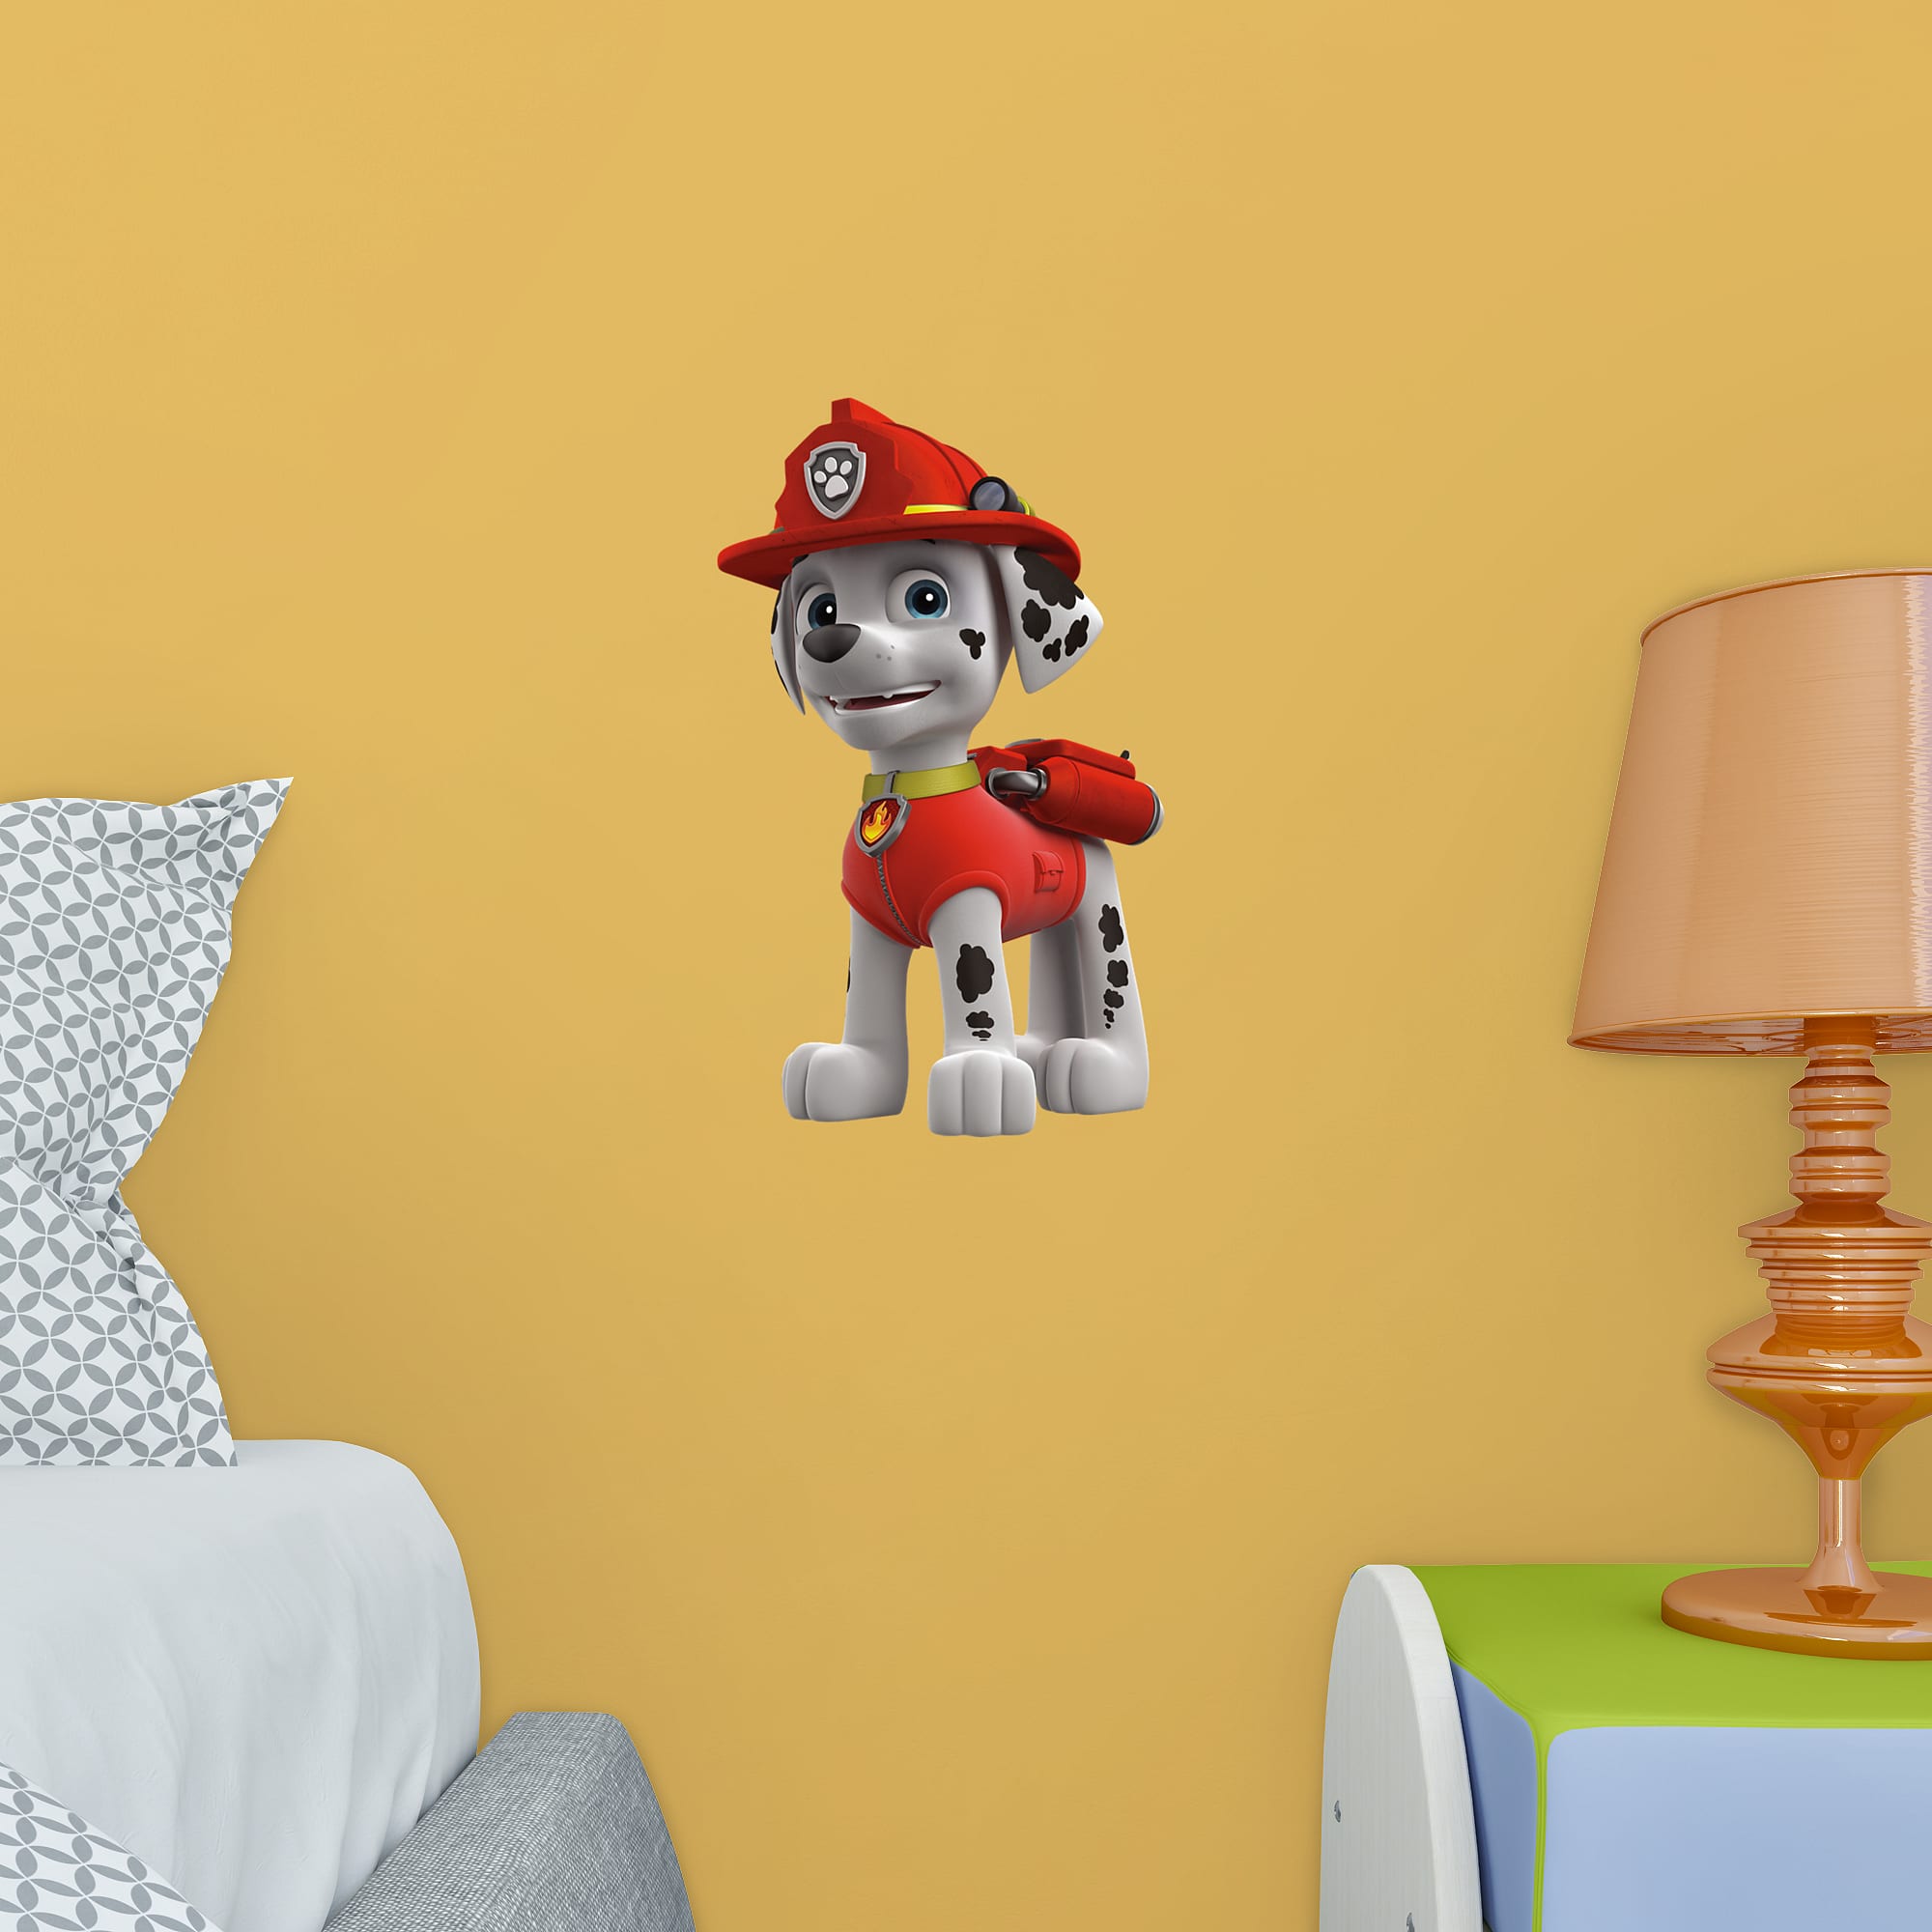 Marshall - Officially Licensed PAW Patrol Removable Wall Decal 10.0"W x 16.0"H by Fathead | Vinyl